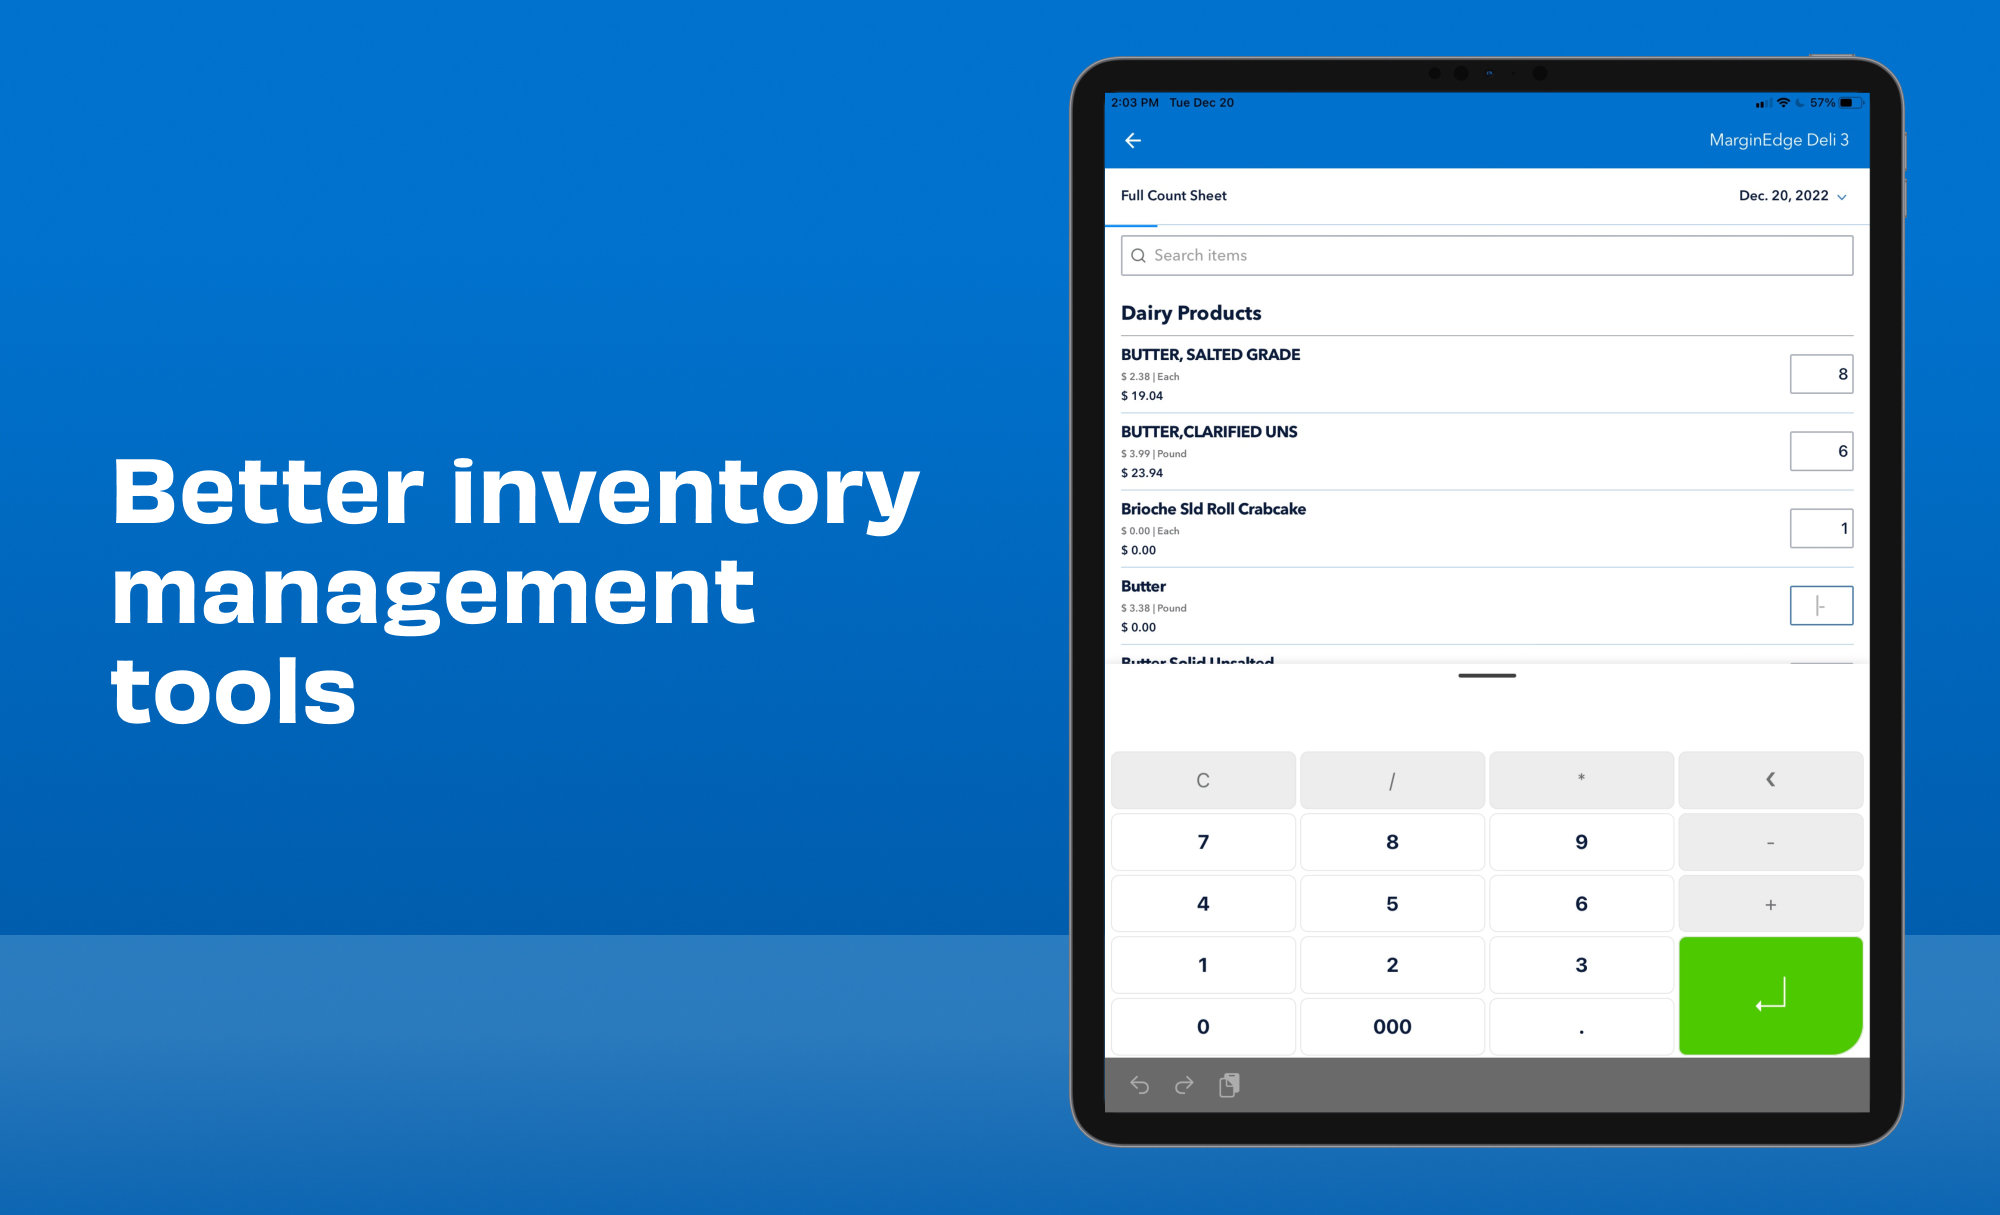 MarginEdge makes taking inventory easier, faster, and more informative. We process invoices in 24-48 hours, so product prices are automatically updated and new products are already on inventory count sheets. You can kiss manual spreadsheets goodbye!